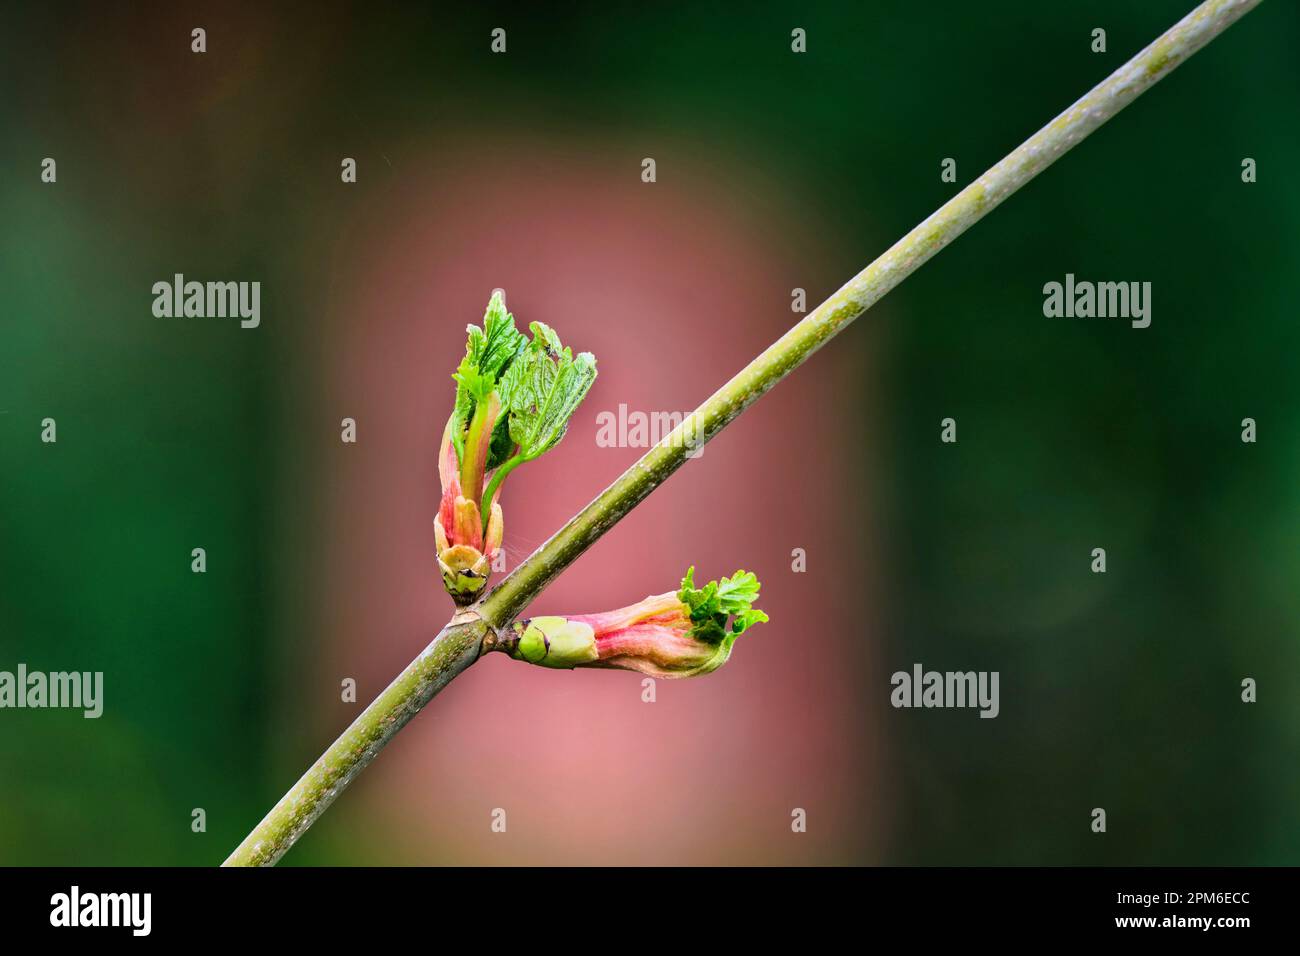 Ribes sanguineum unfolding buds of a blood currant in a park against blurred background Stock Photo